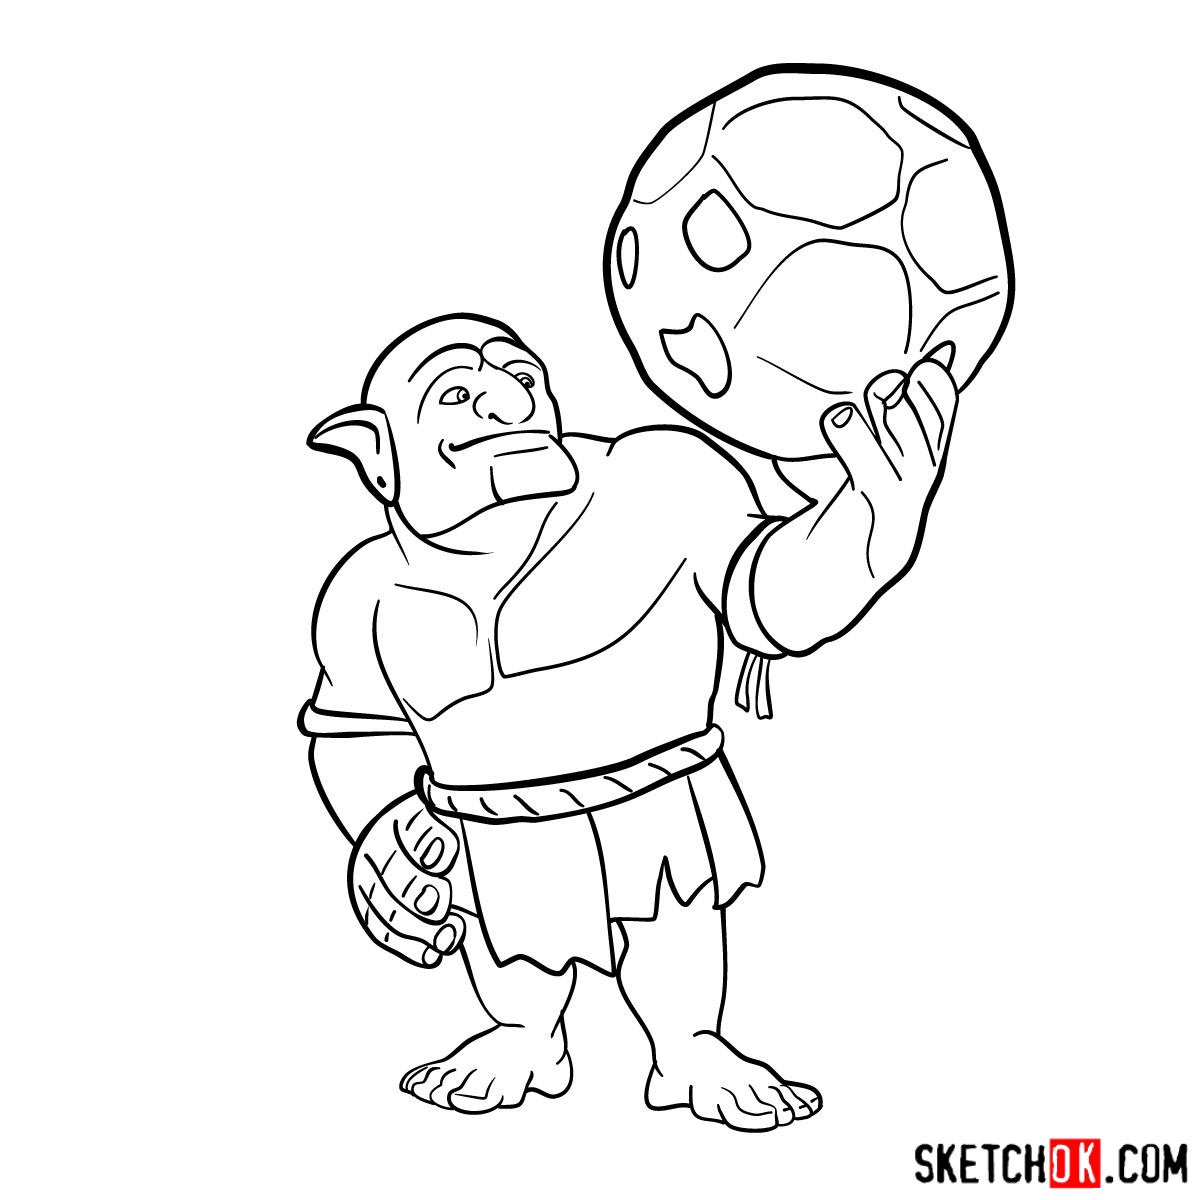 How to draw Bowler from Clash of Clans - step 10